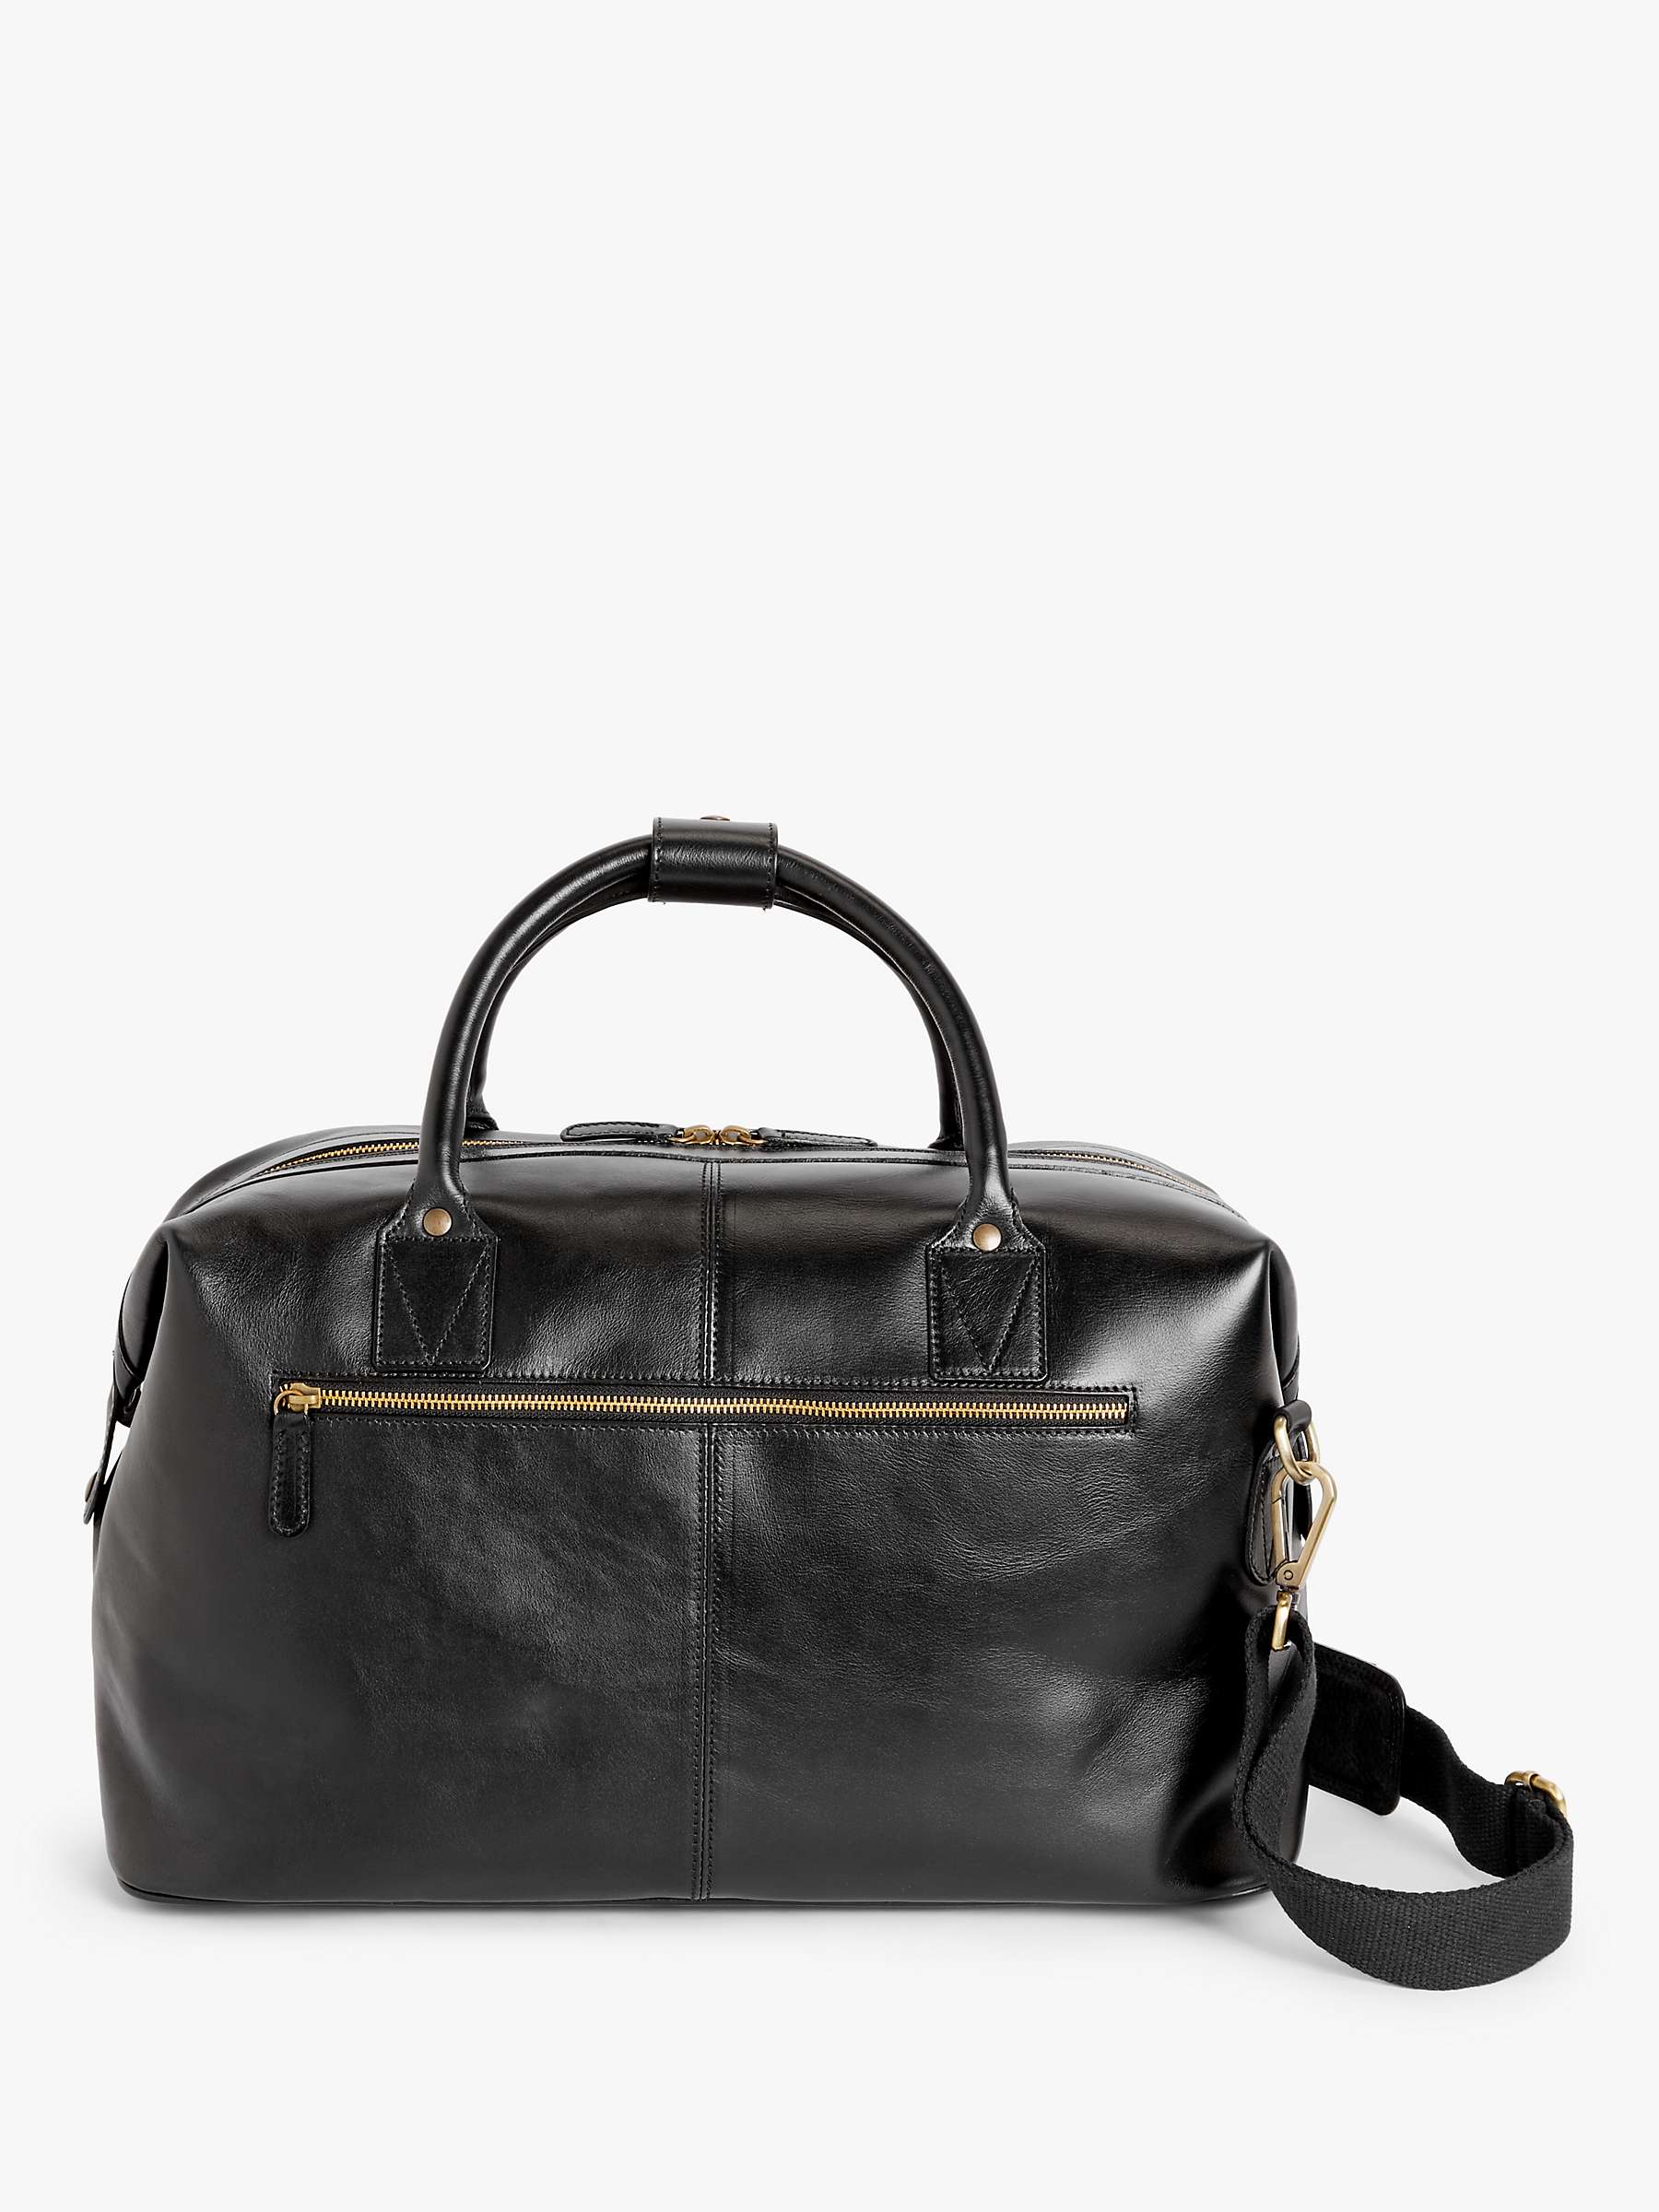 Buy John Lewis Made in Italy Leather Holdall Online at johnlewis.com